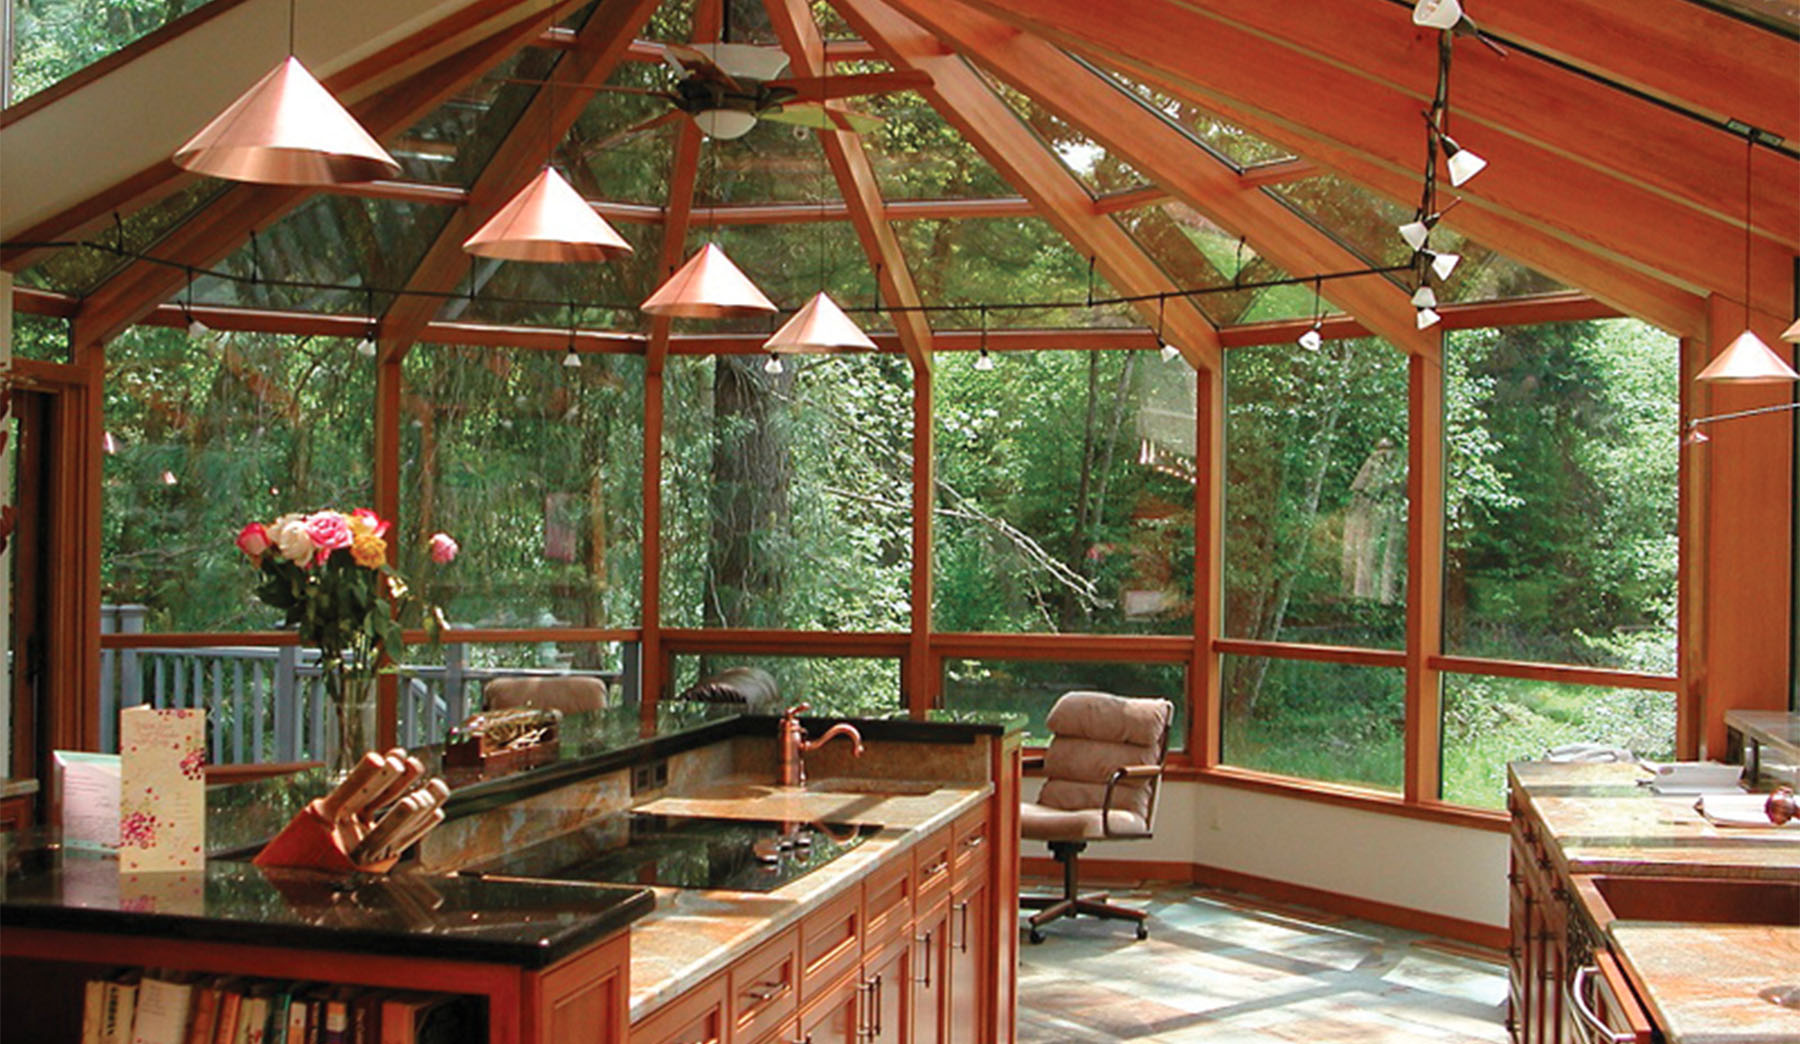 An outdoor kitchen protected from the elements. Sunrooms provide natural light throughout the day.